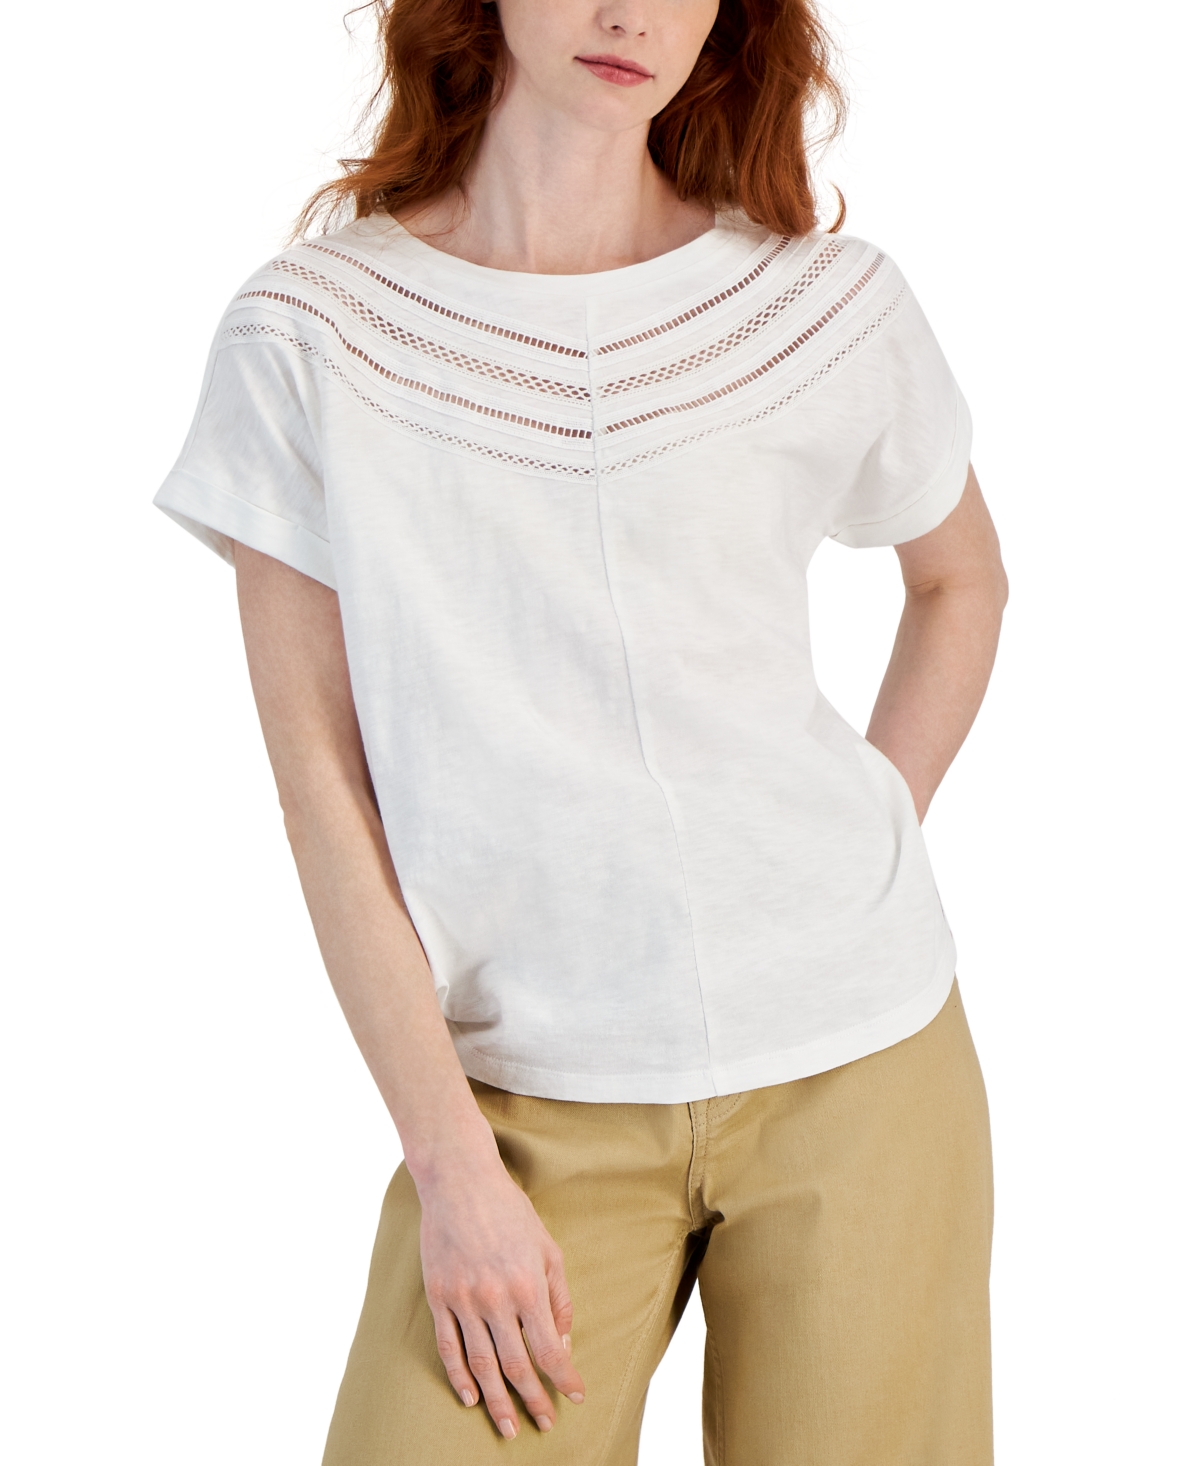 Nautica Jeans Women's Cotton Open-lace-trim Short-sleeve Top In Bright White